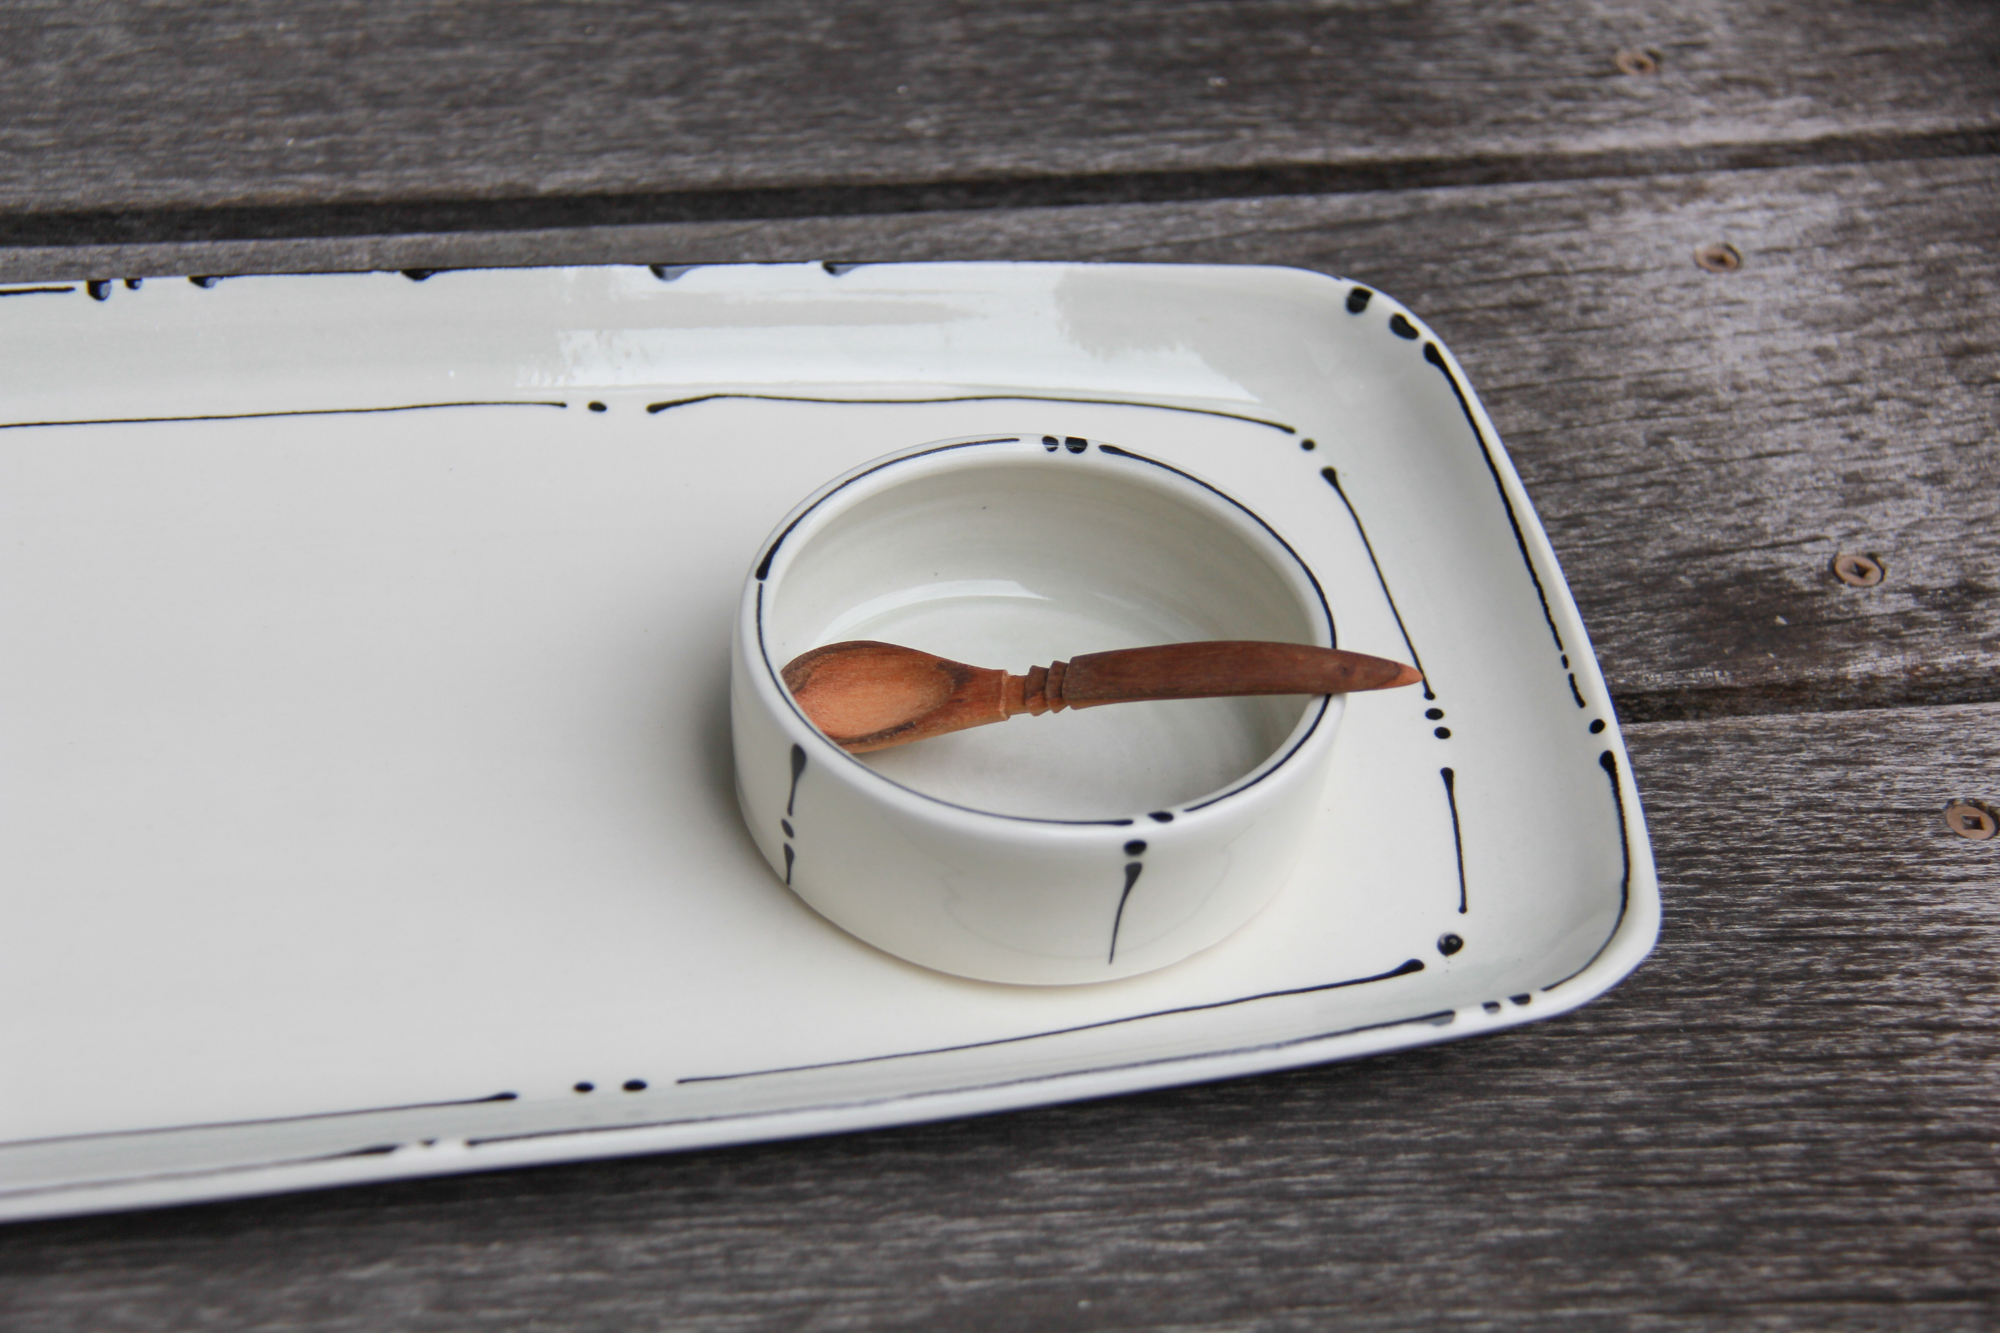 Iris Dorton: Large Tray with Circle Dot Motif, comes with Wood Spoon and Dish Product Image 7 of 7